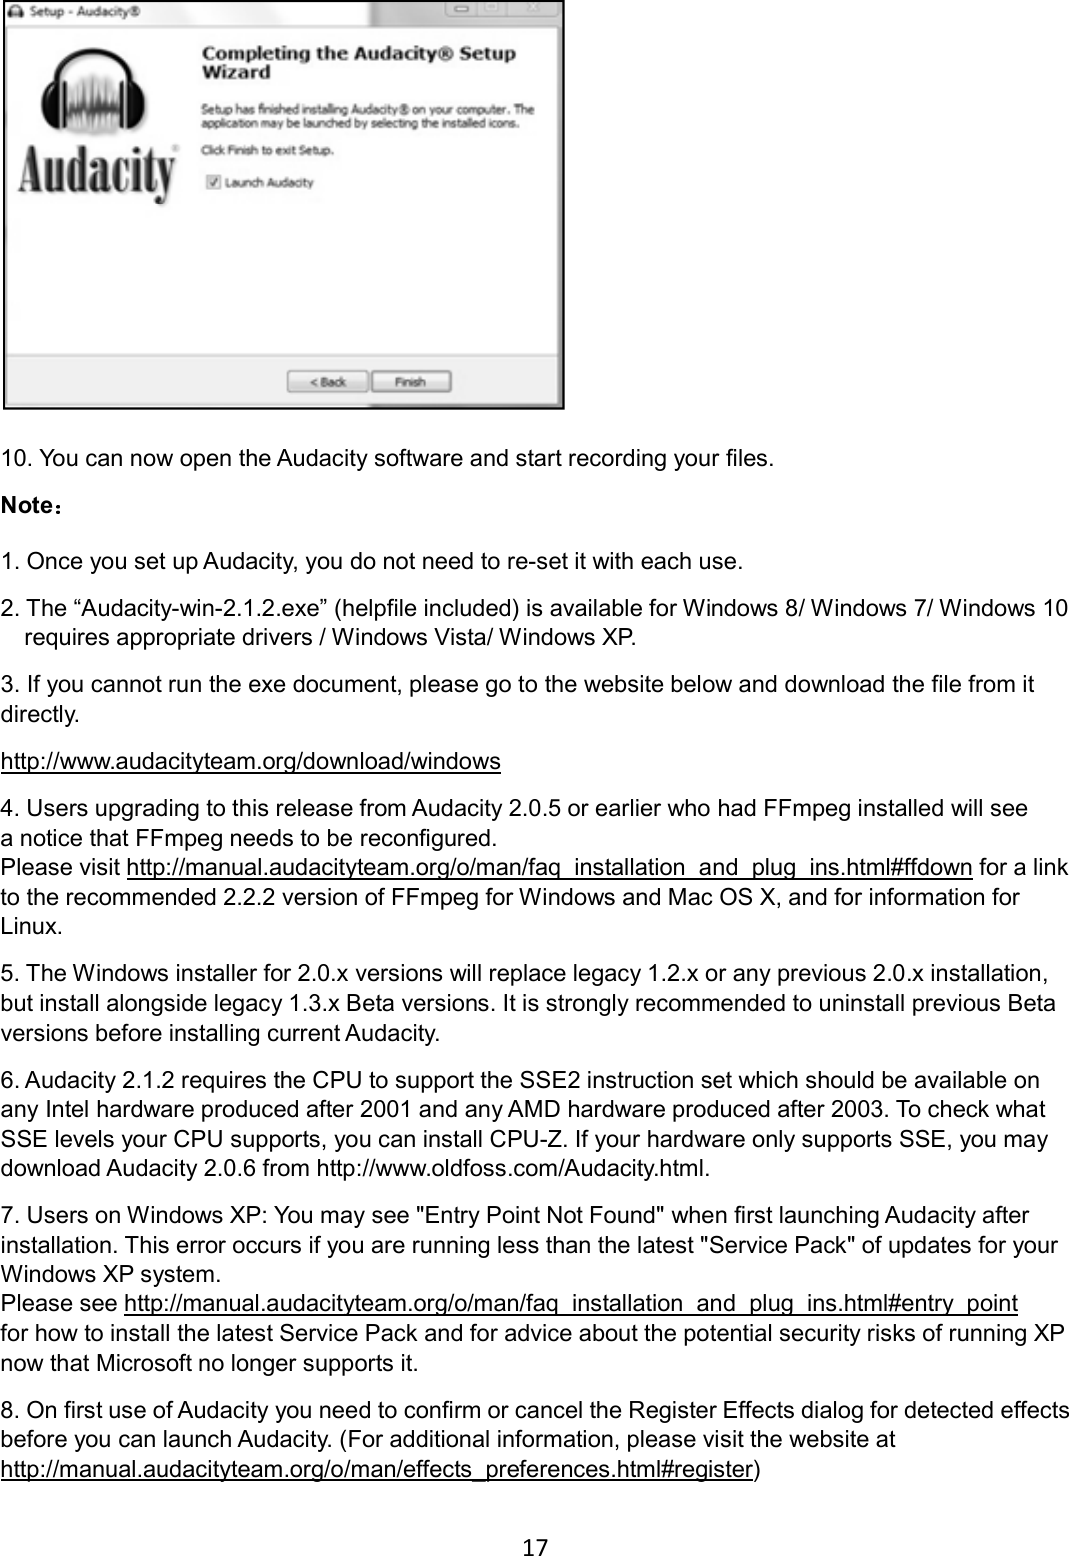 17     10. You can now open the Audacity software and start recording your files.     Note  1. Once you set up Audacity, you do not need to re-set it with each use. 2. The “Audacity-win-2.1.2.exe” (helpfile included) is available for Windows 8/ Windows 7/ Windows 10 requires appropriate drivers / Windows Vista/ Windows XP. 3. If you cannot run the exe document, please go to the website below and download the file from it directly. http://www.audacityteam.org/download/windows 4. Users upgrading to this release from Audacity 2.0.5 or earlier who had FFmpeg installed will see a notice that FFmpeg needs to be reconfigured.   Please visit http://manual.audacityteam.org/o/man/faq_installation_and_plug_ins.html#ffdown for a link to the recommended 2.2.2 version of FFmpeg for Windows and Mac OS X, and for information for Linux. 5. The Windows installer for 2.0.x versions will replace legacy 1.2.x or any previous 2.0.x installation, but install alongside legacy 1.3.x Beta versions. It is strongly recommended to uninstall previous Beta versions before installing current Audacity. 6. Audacity 2.1.2 requires the CPU to support the SSE2 instruction set which should be available on any Intel hardware produced after 2001 and any AMD hardware produced after 2003. To check what SSE levels your CPU supports, you can install CPU-Z. If your hardware only supports SSE, you may download Audacity 2.0.6 from http://www.oldfoss.com/Audacity.html. 7. Users on Windows XP: You may see &quot;Entry Point Not Found&quot; when first launching Audacity after installation. This error occurs if you are running less than the latest &quot;Service Pack&quot; of updates for your Windows XP system. Please see http://manual.audacityteam.org/o/man/faq_installation_and_plug_ins.html#entry_point for how to install the latest Service Pack and for advice about the potential security risks of running XP now that Microsoft no longer supports it. 8. On first use of Audacity you need to confirm or cancel the Register Effects dialog for detected effects before you can launch Audacity. (For additional information, please visit the website at http://manual.audacityteam.org/o/man/effects_preferences.html#register) 